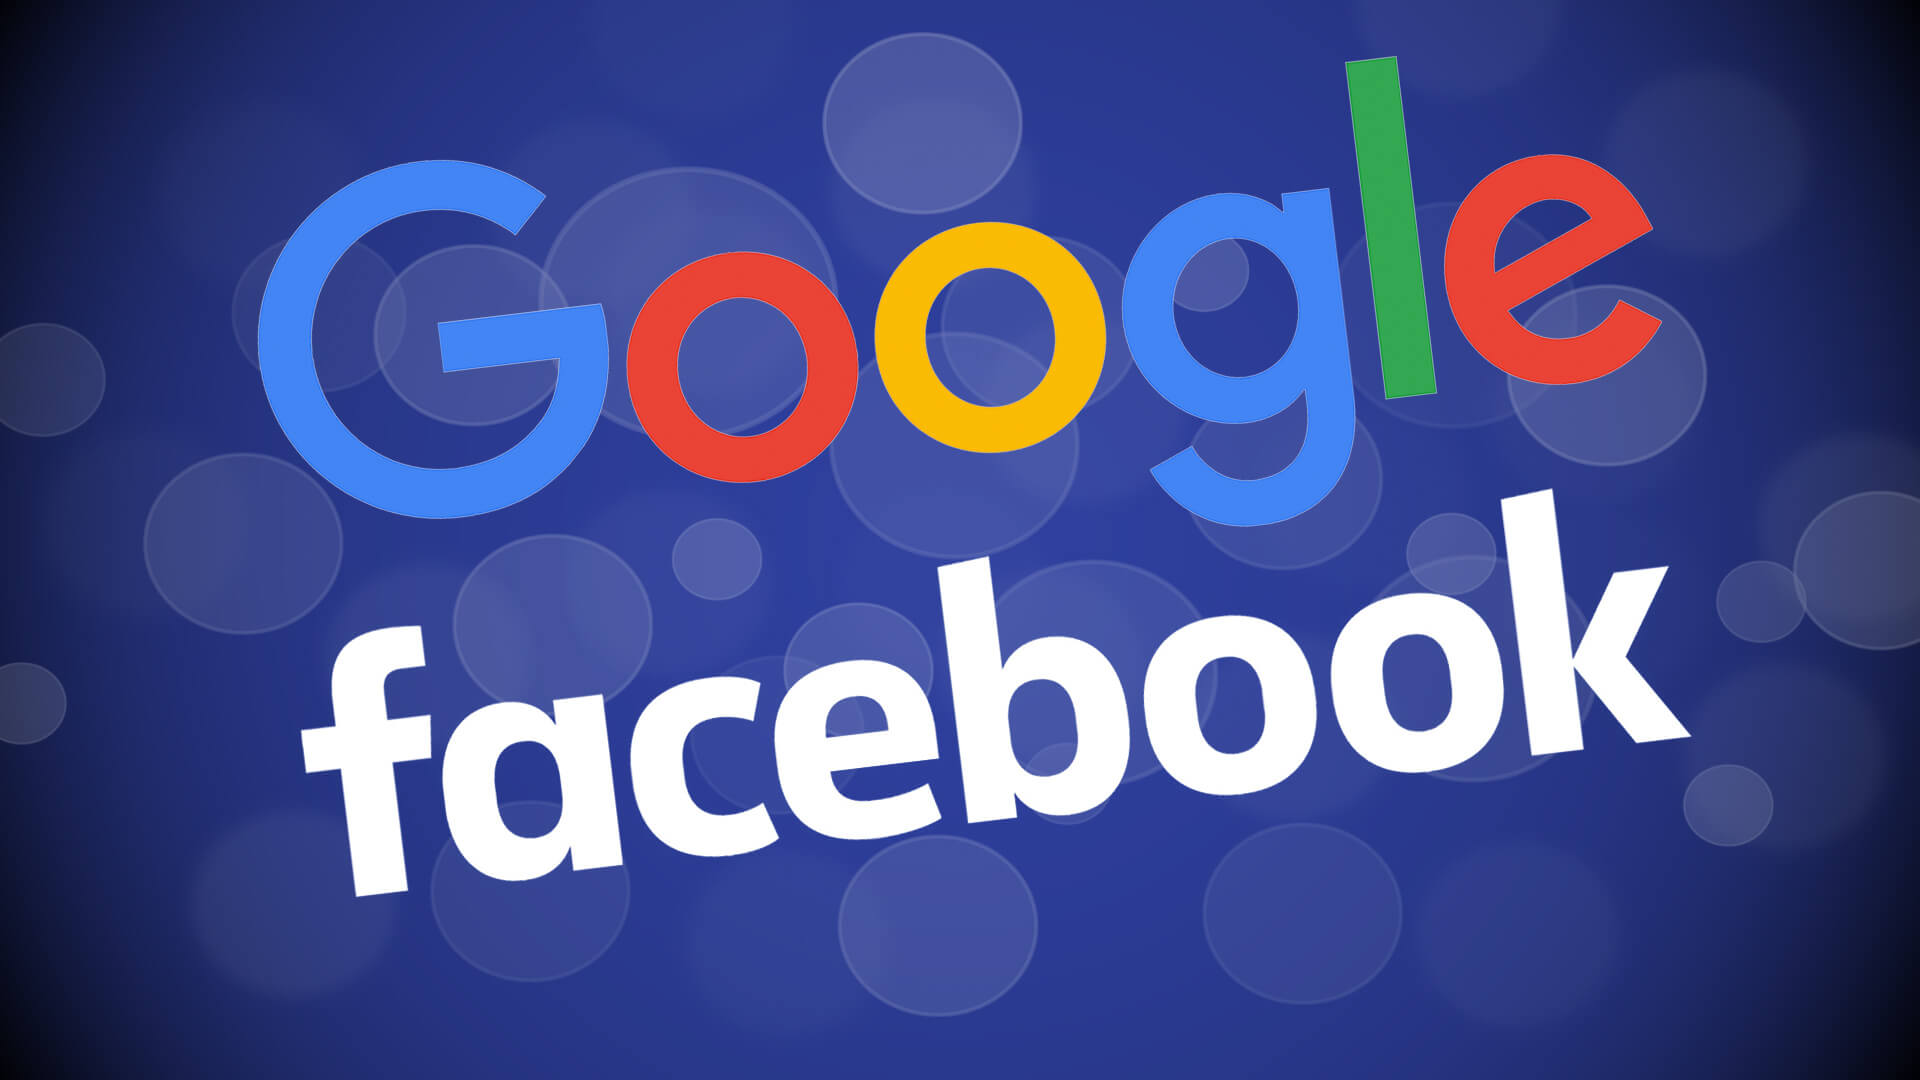 Google, Facebook to train over 2m Africans yearly on digital tools